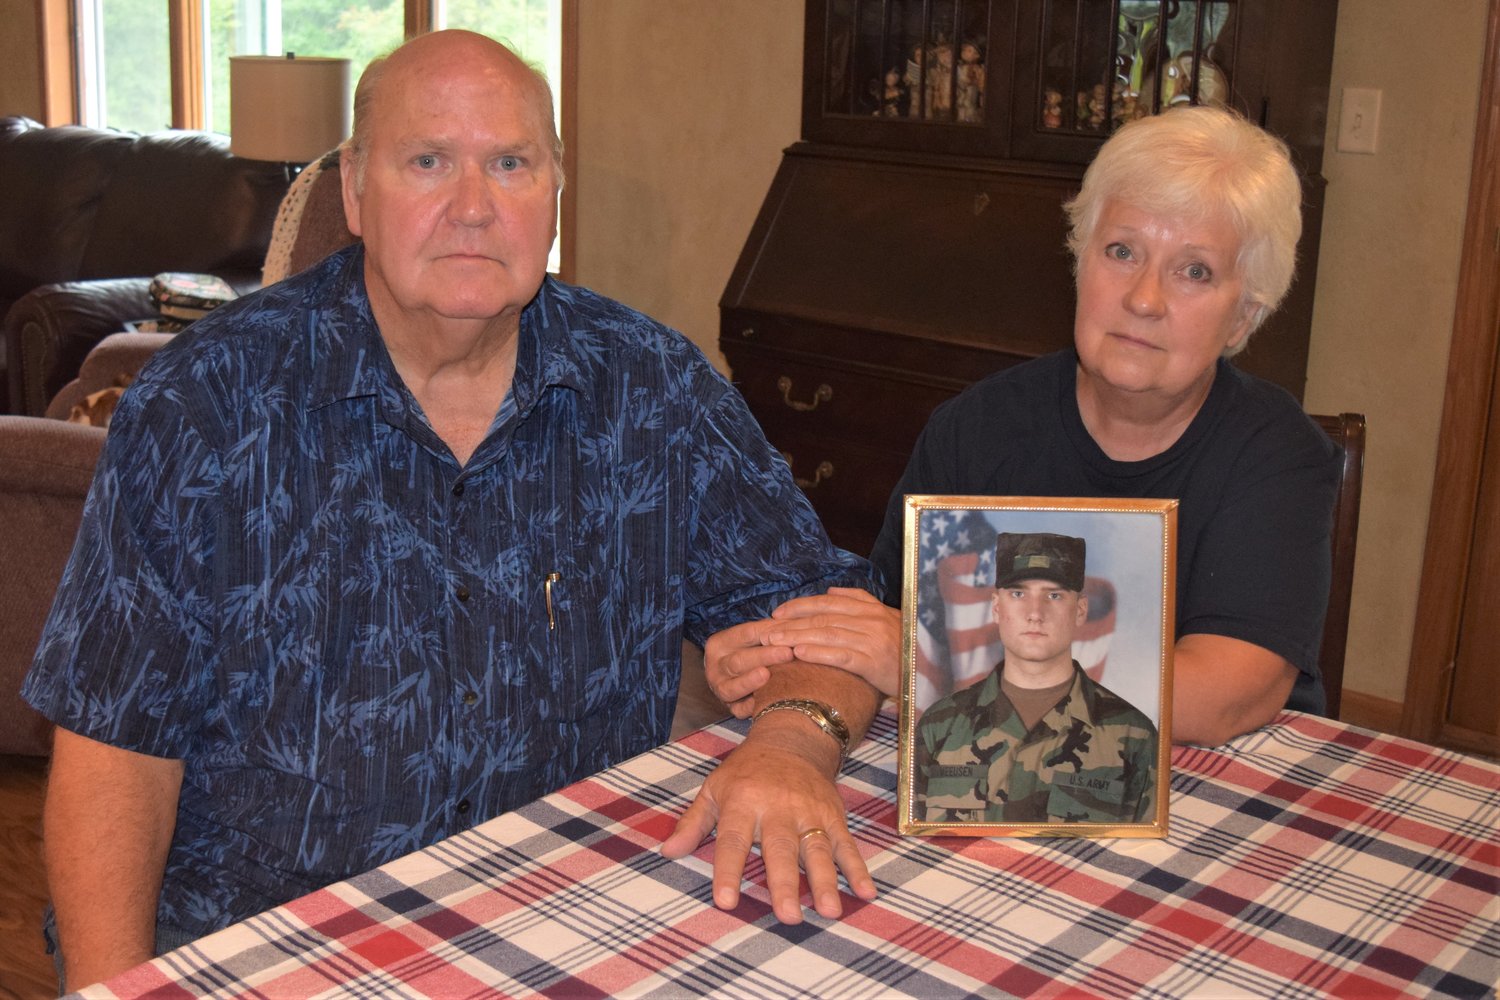 Craig and Jane Meeusen contend a report from the Department of Veterans Office of Inspector General provides a chilling story how their son drove himself to the Tomah VA for medical care only to be transferred to another health care facility in a coma, eventually leading to his death. 